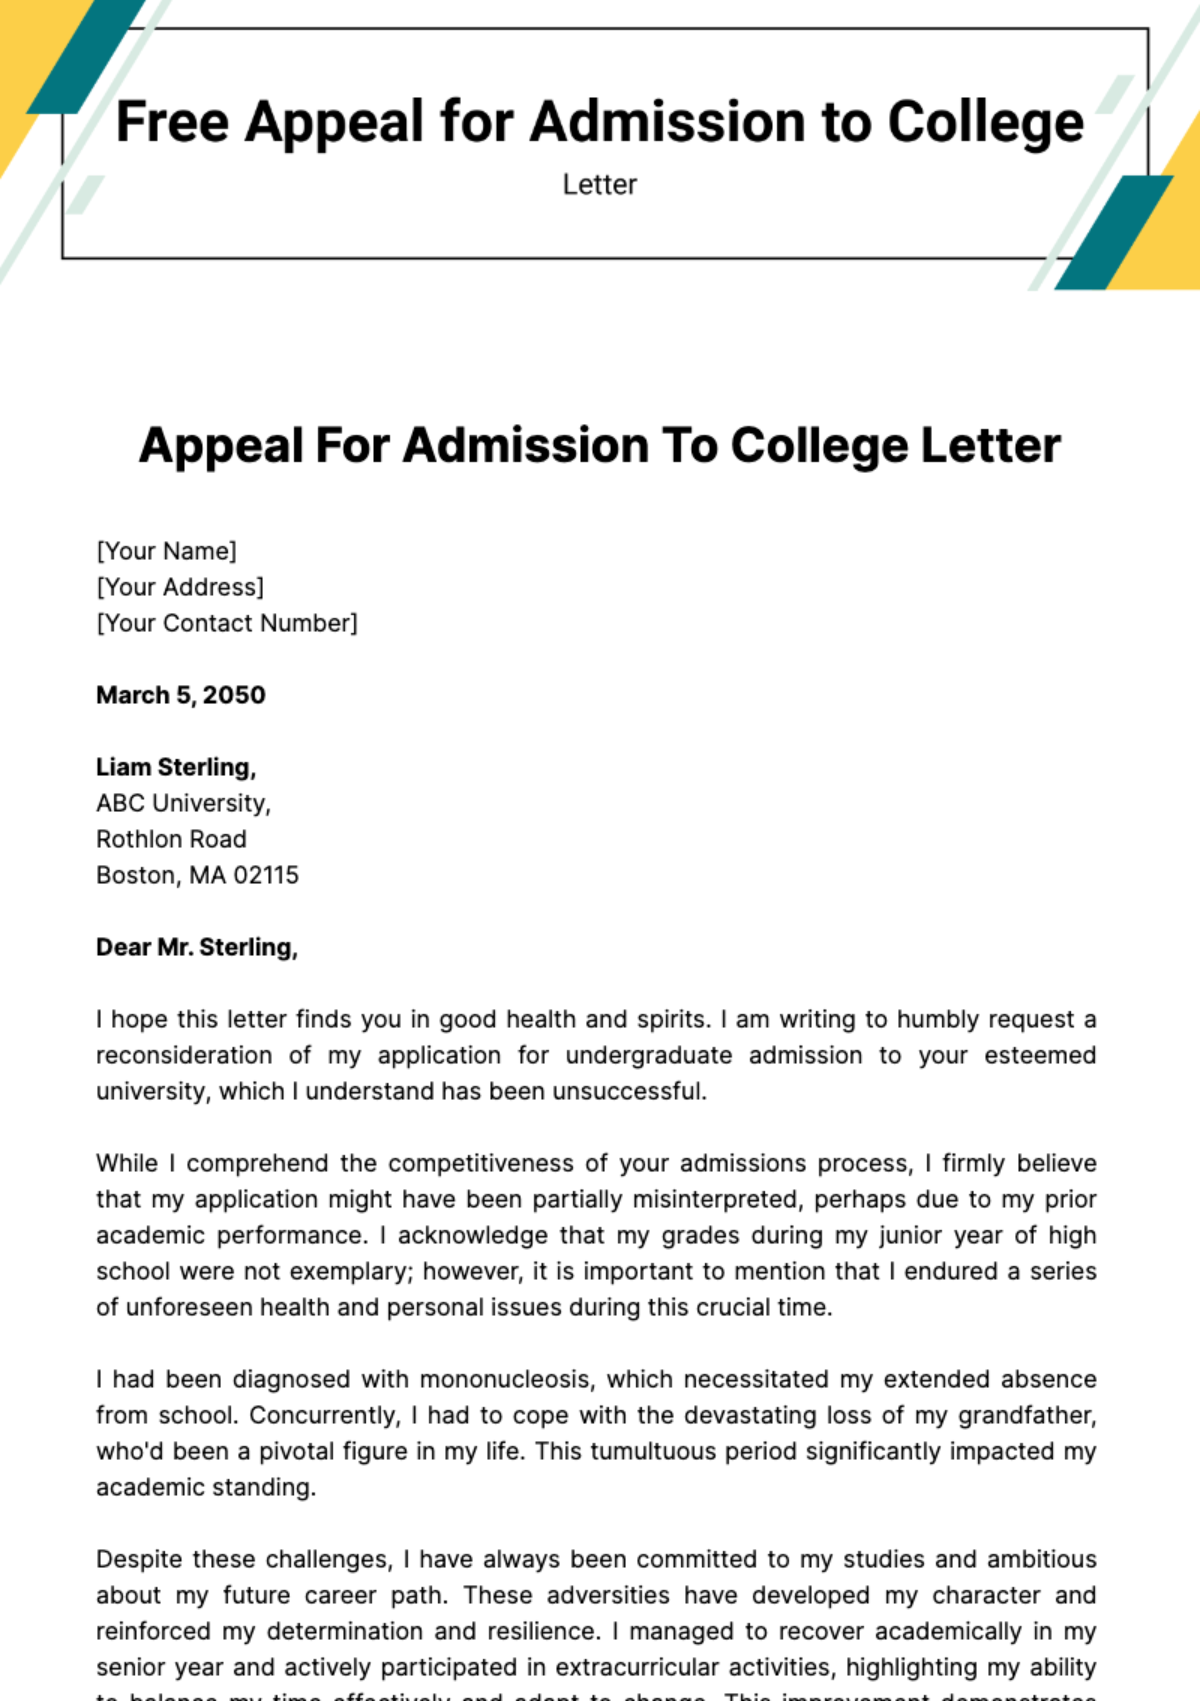 Free Appeal for Admission to College Letter Template